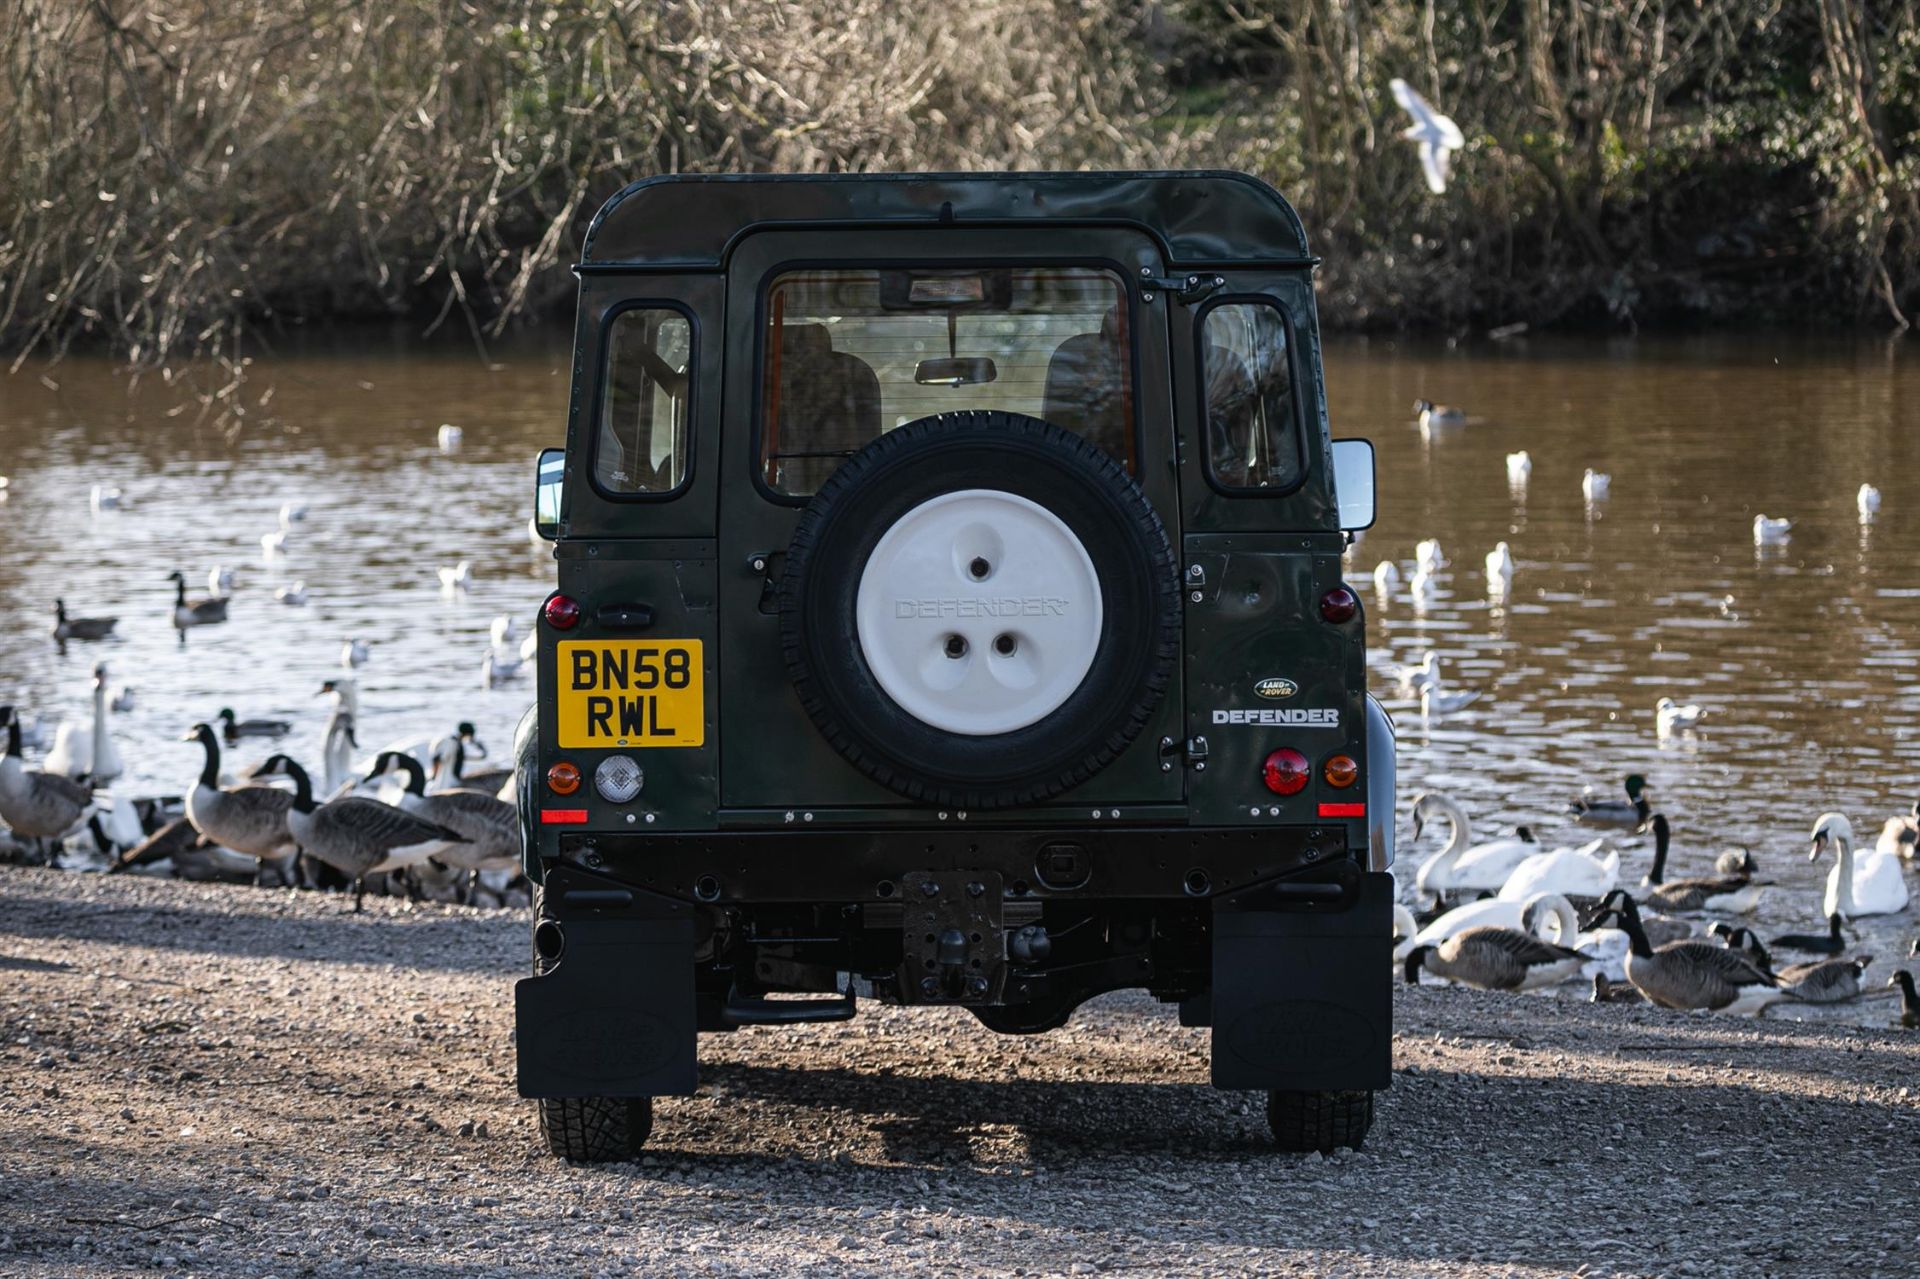 2008 Land Rover Defender 90 TDCi 2.4 County Station Wagon - Image 8 of 10